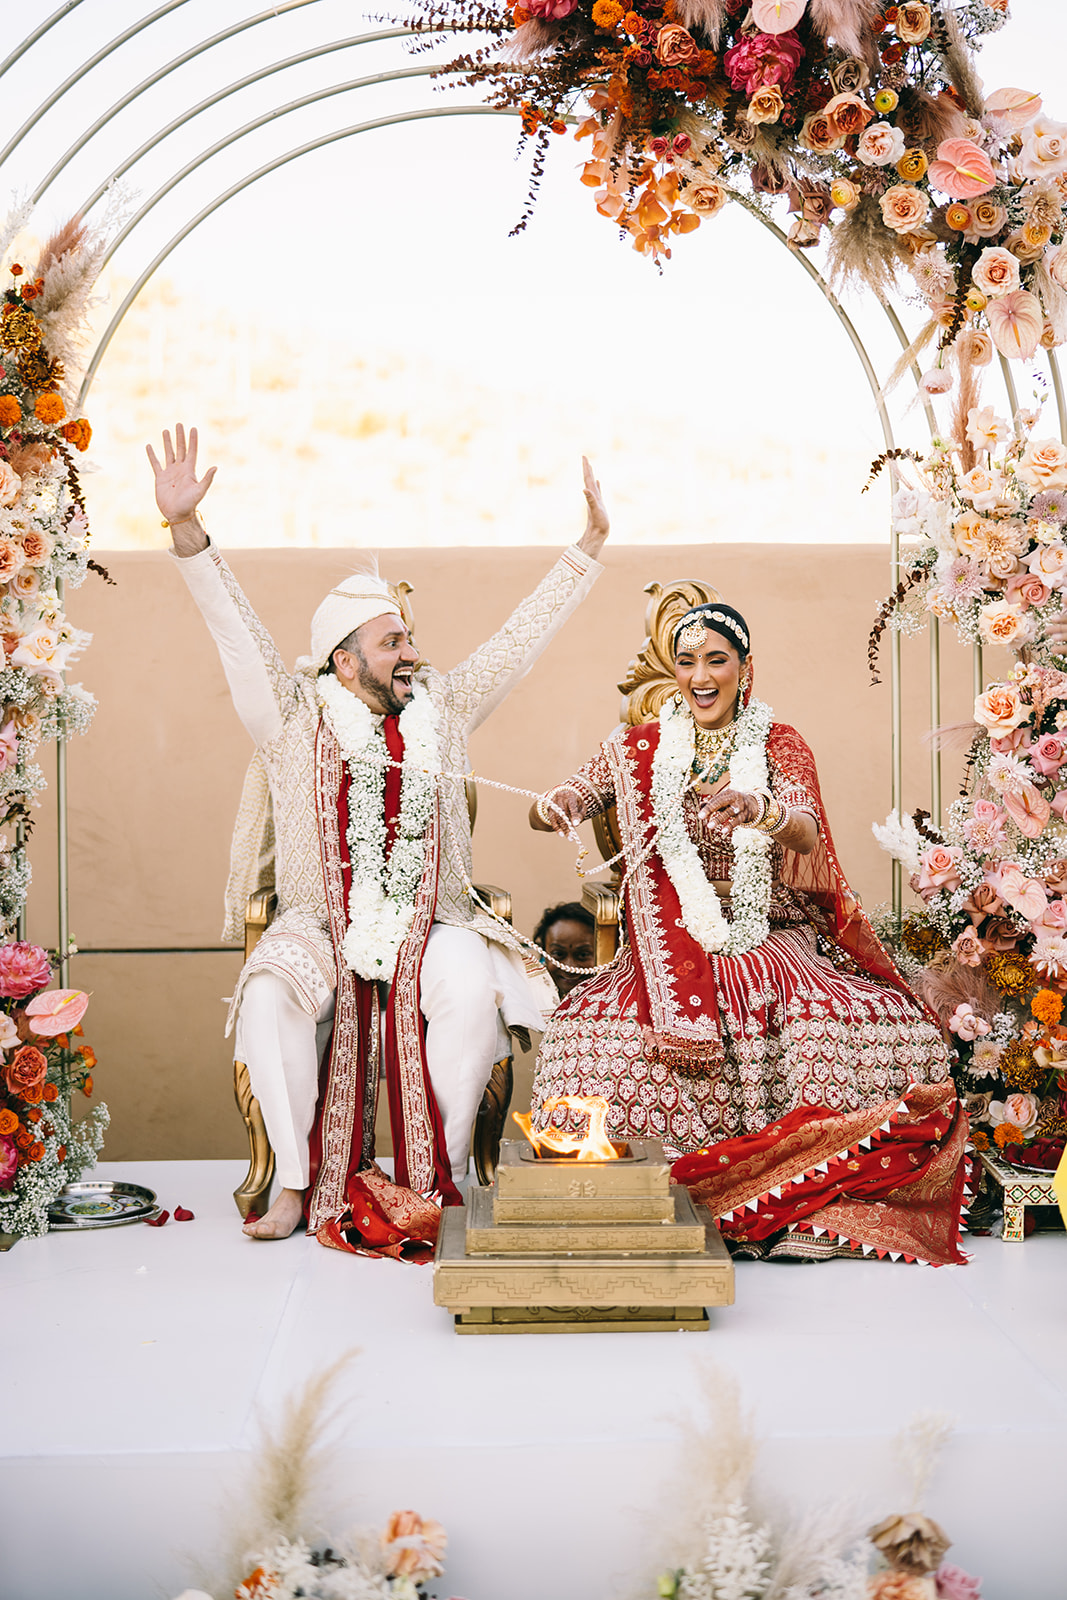 Indian groom with his hands up and cheering and indian bride is smiling with strings of flowers in her hands